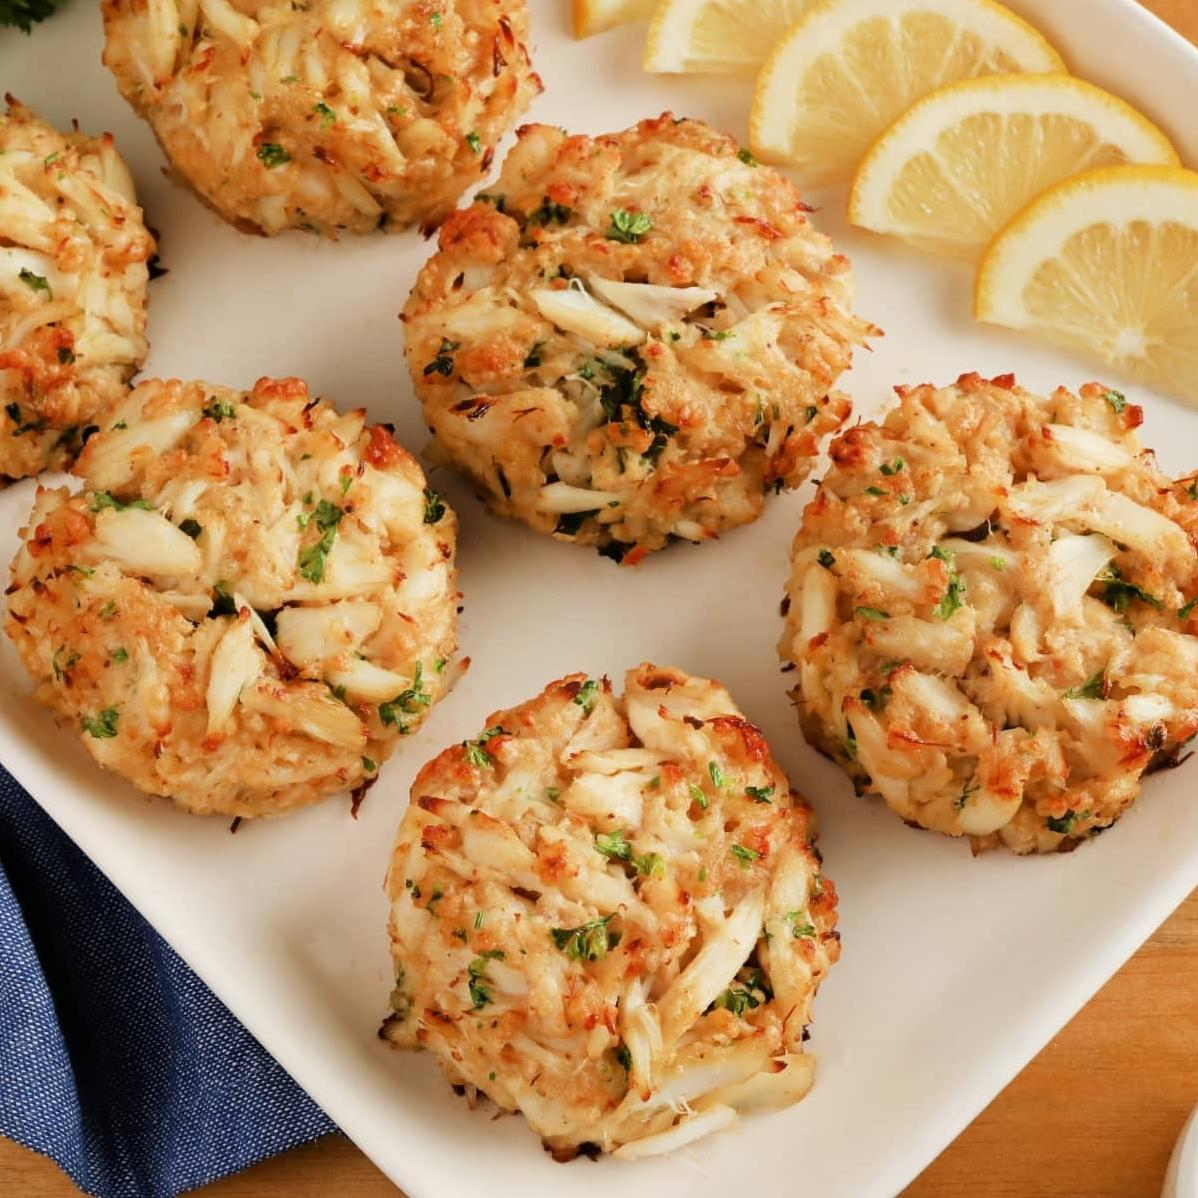  You won't even miss the bread crumbs in these tasty gluten-free crabby patties.